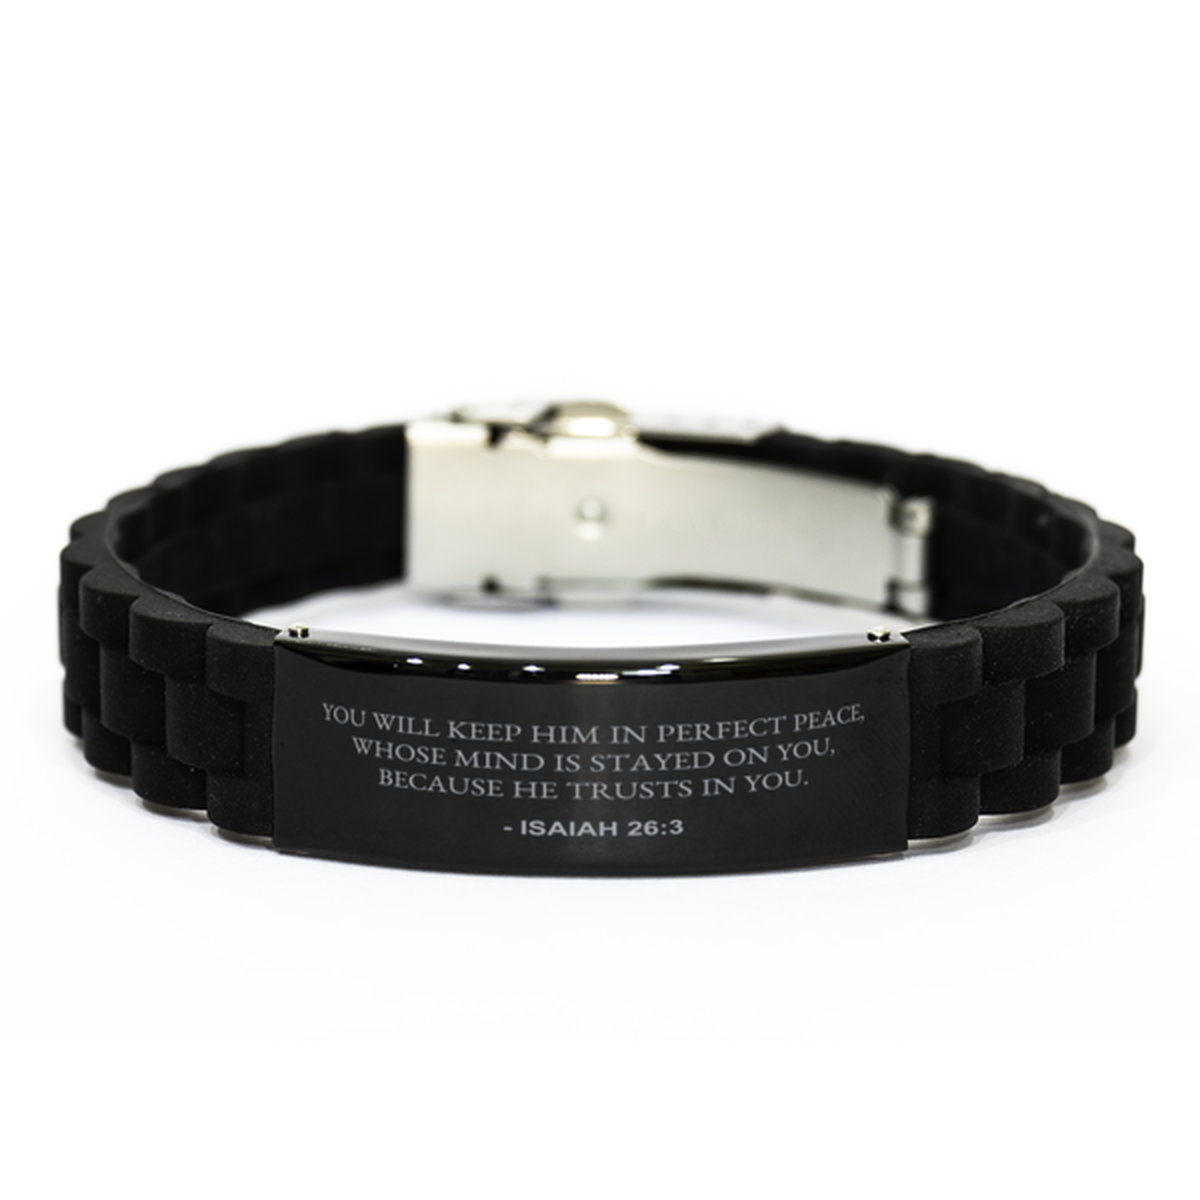 Bible Verse Black Bracelet,, Isaiah 26:3 You Will Keep Him In Perfect Peace, Whose Mind Is, Inspirational Christian Gifts For Men Women